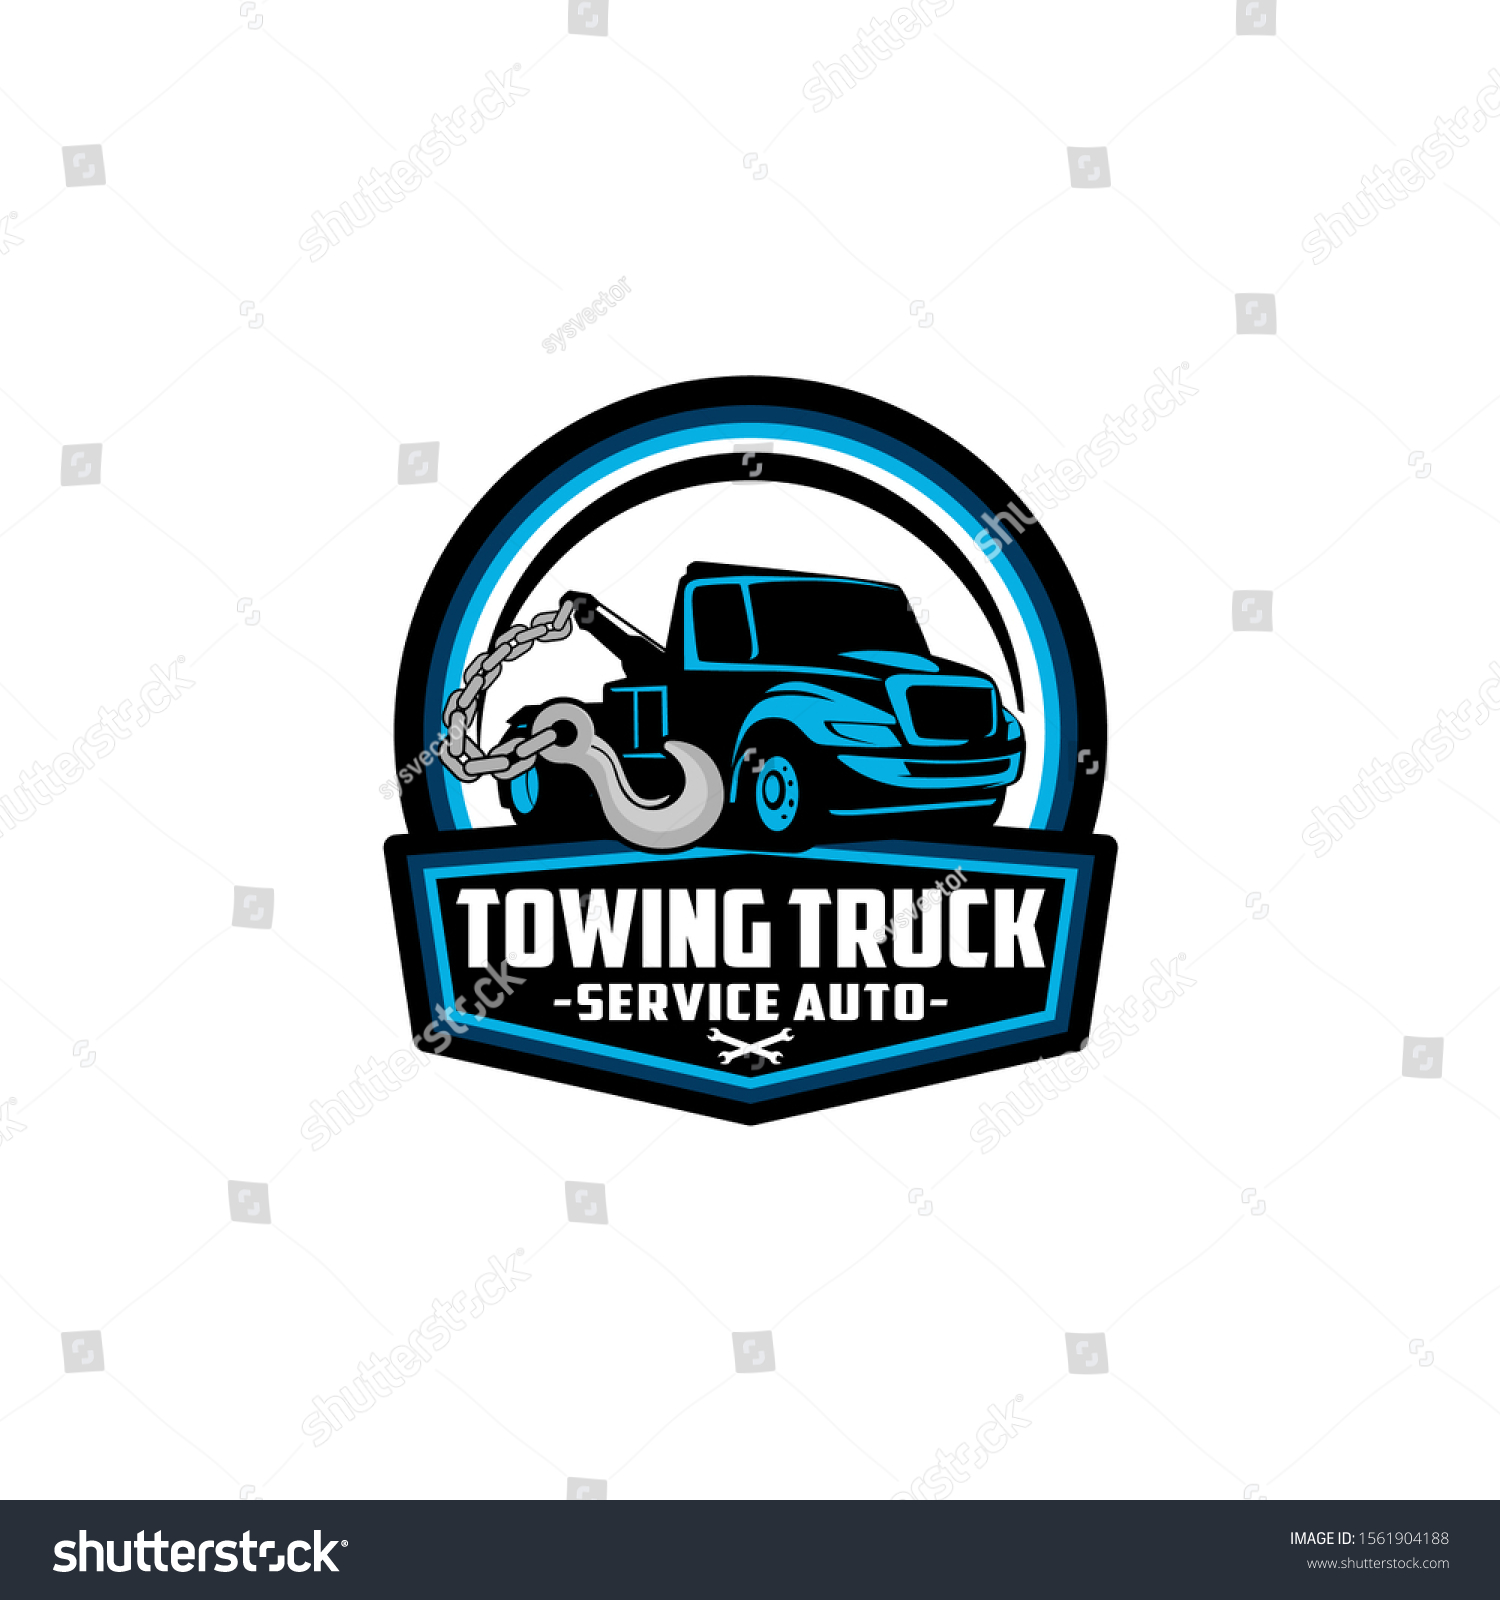 Tow Service Towing Truck Company Logo Stock Vector (Royalty Free Within towing service agreement template